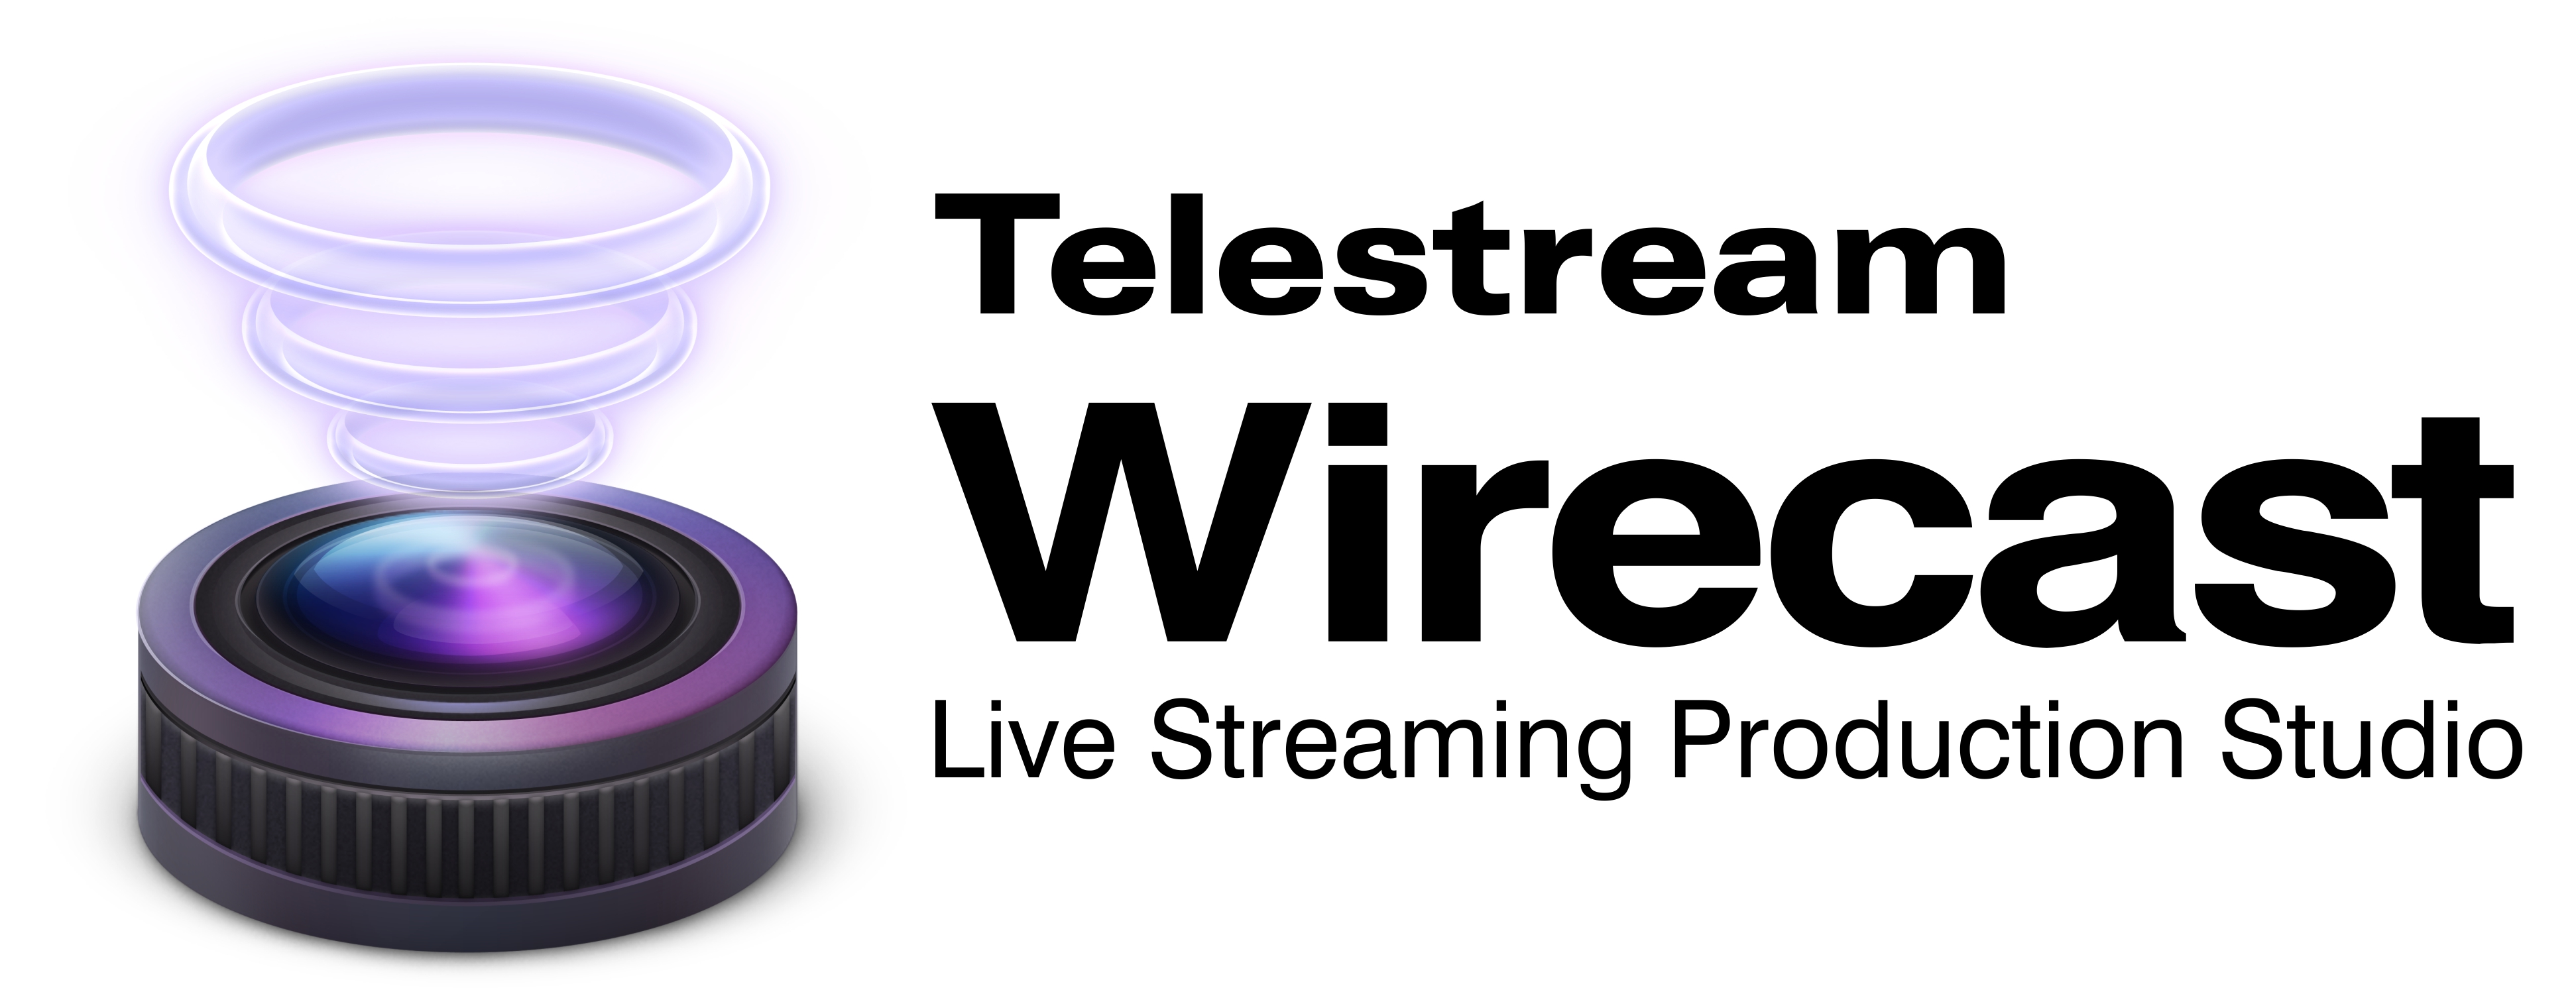 wirecast download Archives